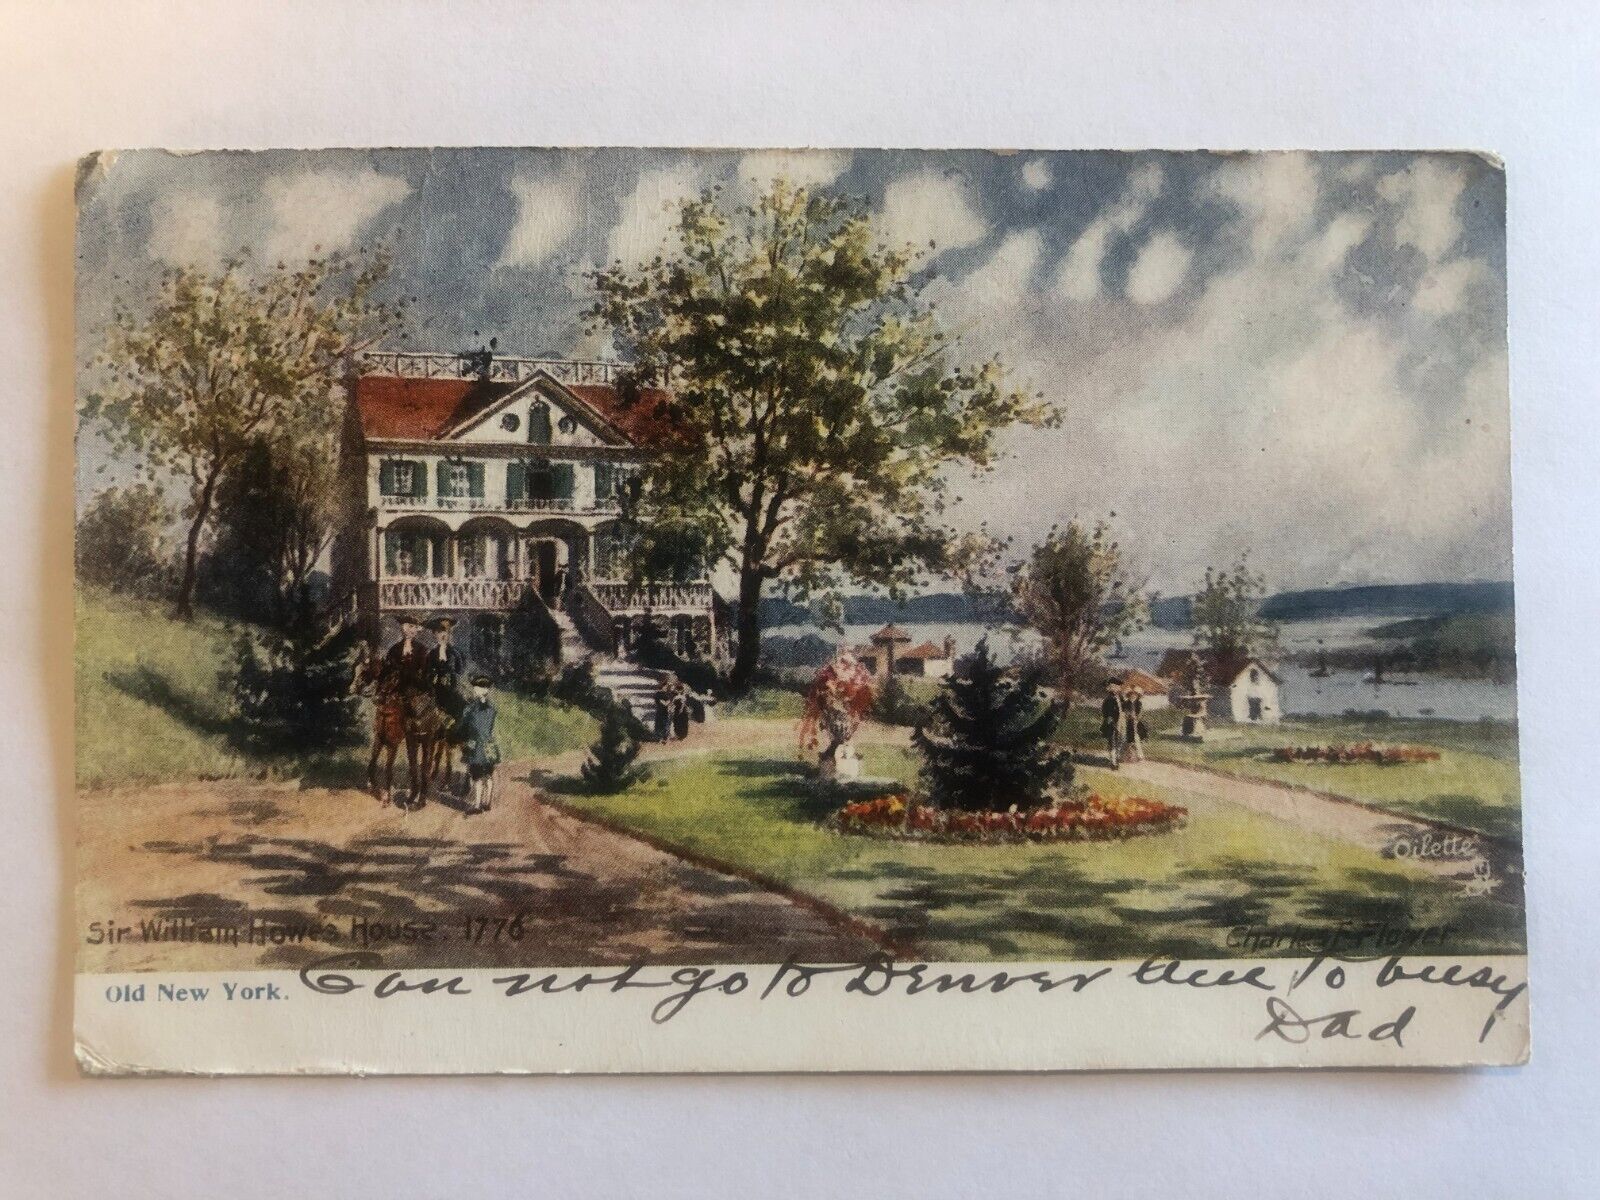 New York City~Sir William Howes House 1776~History~1908 TUCK Post card